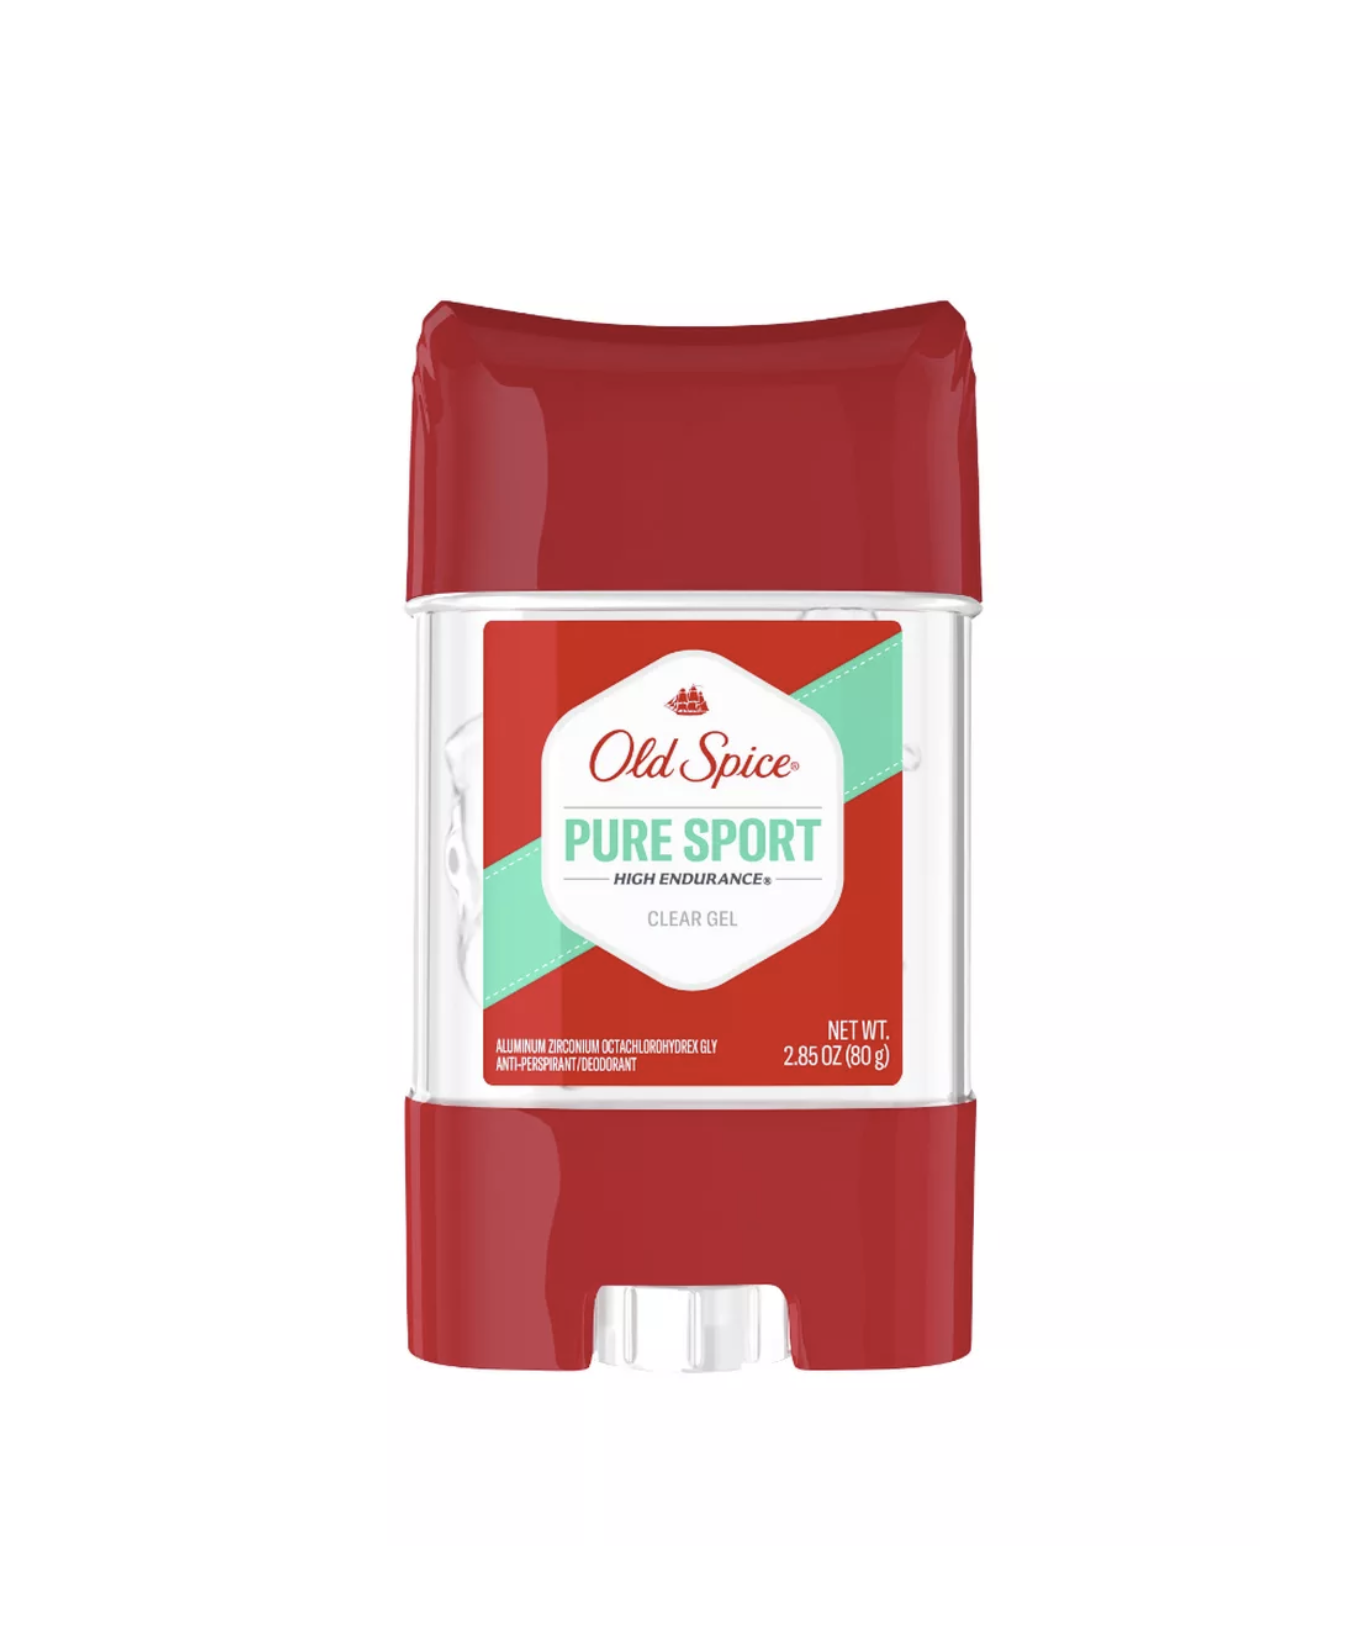    / Old Spice Pure Sport - -  , 70 